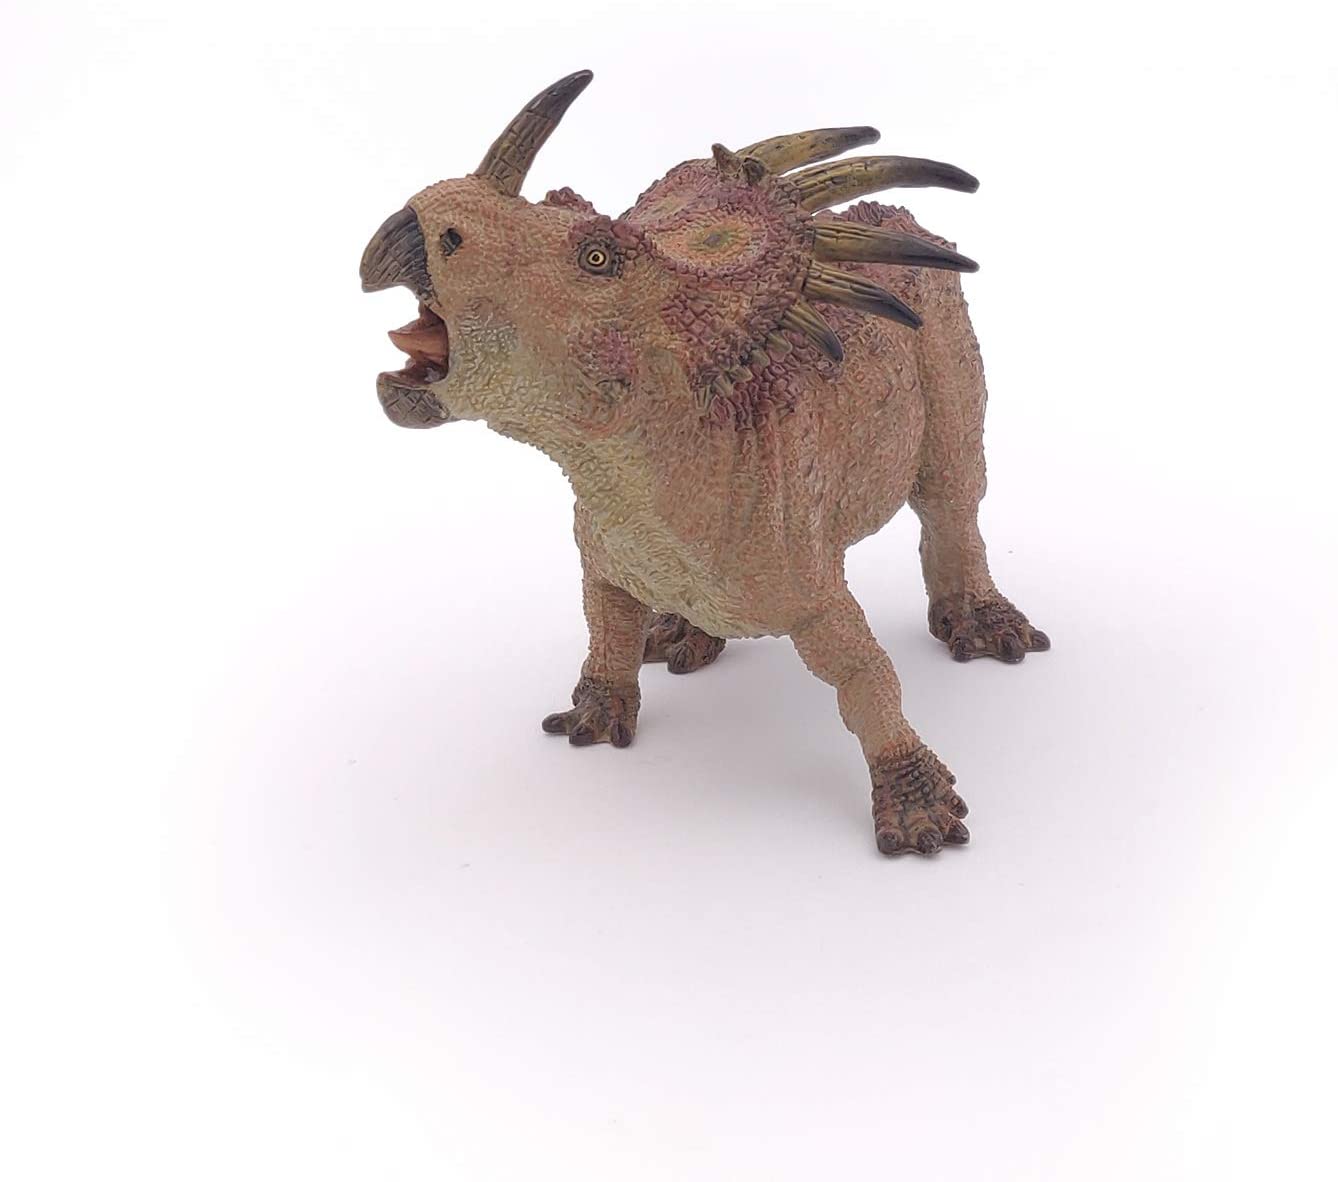 New in Package FREE SHIPPINGCollectA 88147 Styracosaurus Dinosaur Toy 